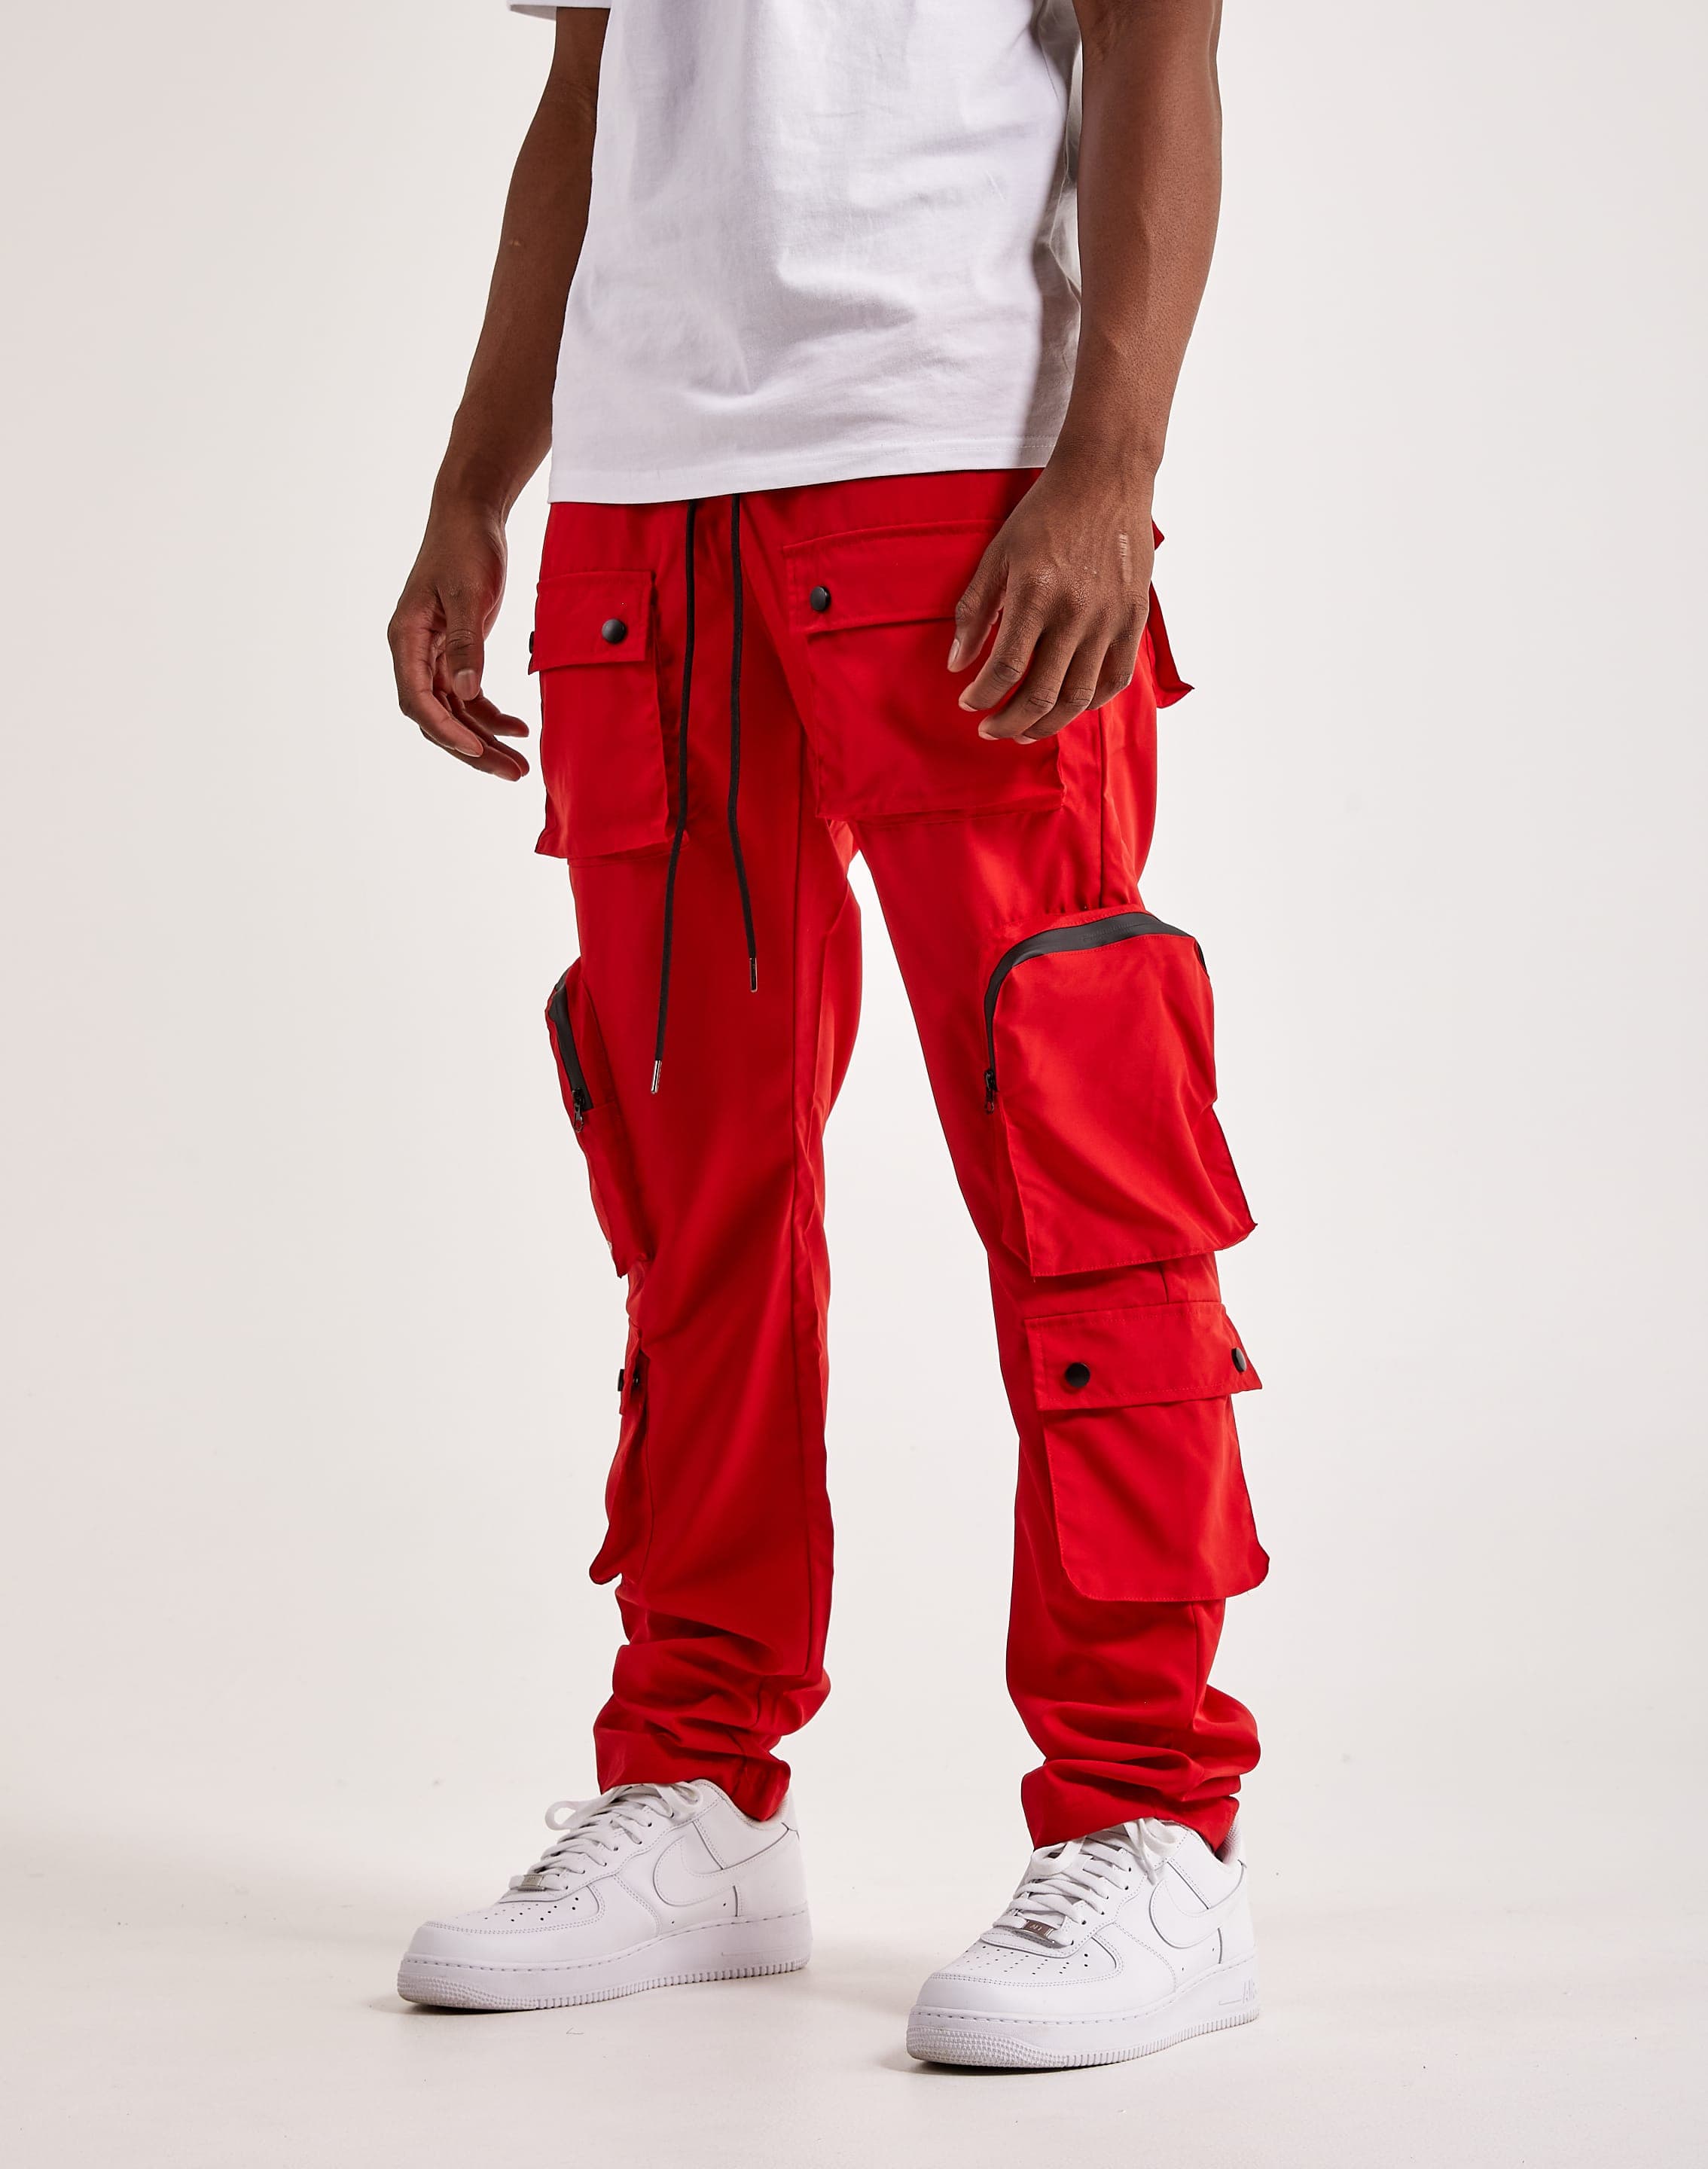 Buy Jump Cuts Mens Printed Burgundy Polyester Slim Fit Cargo Pant at  Amazon.in